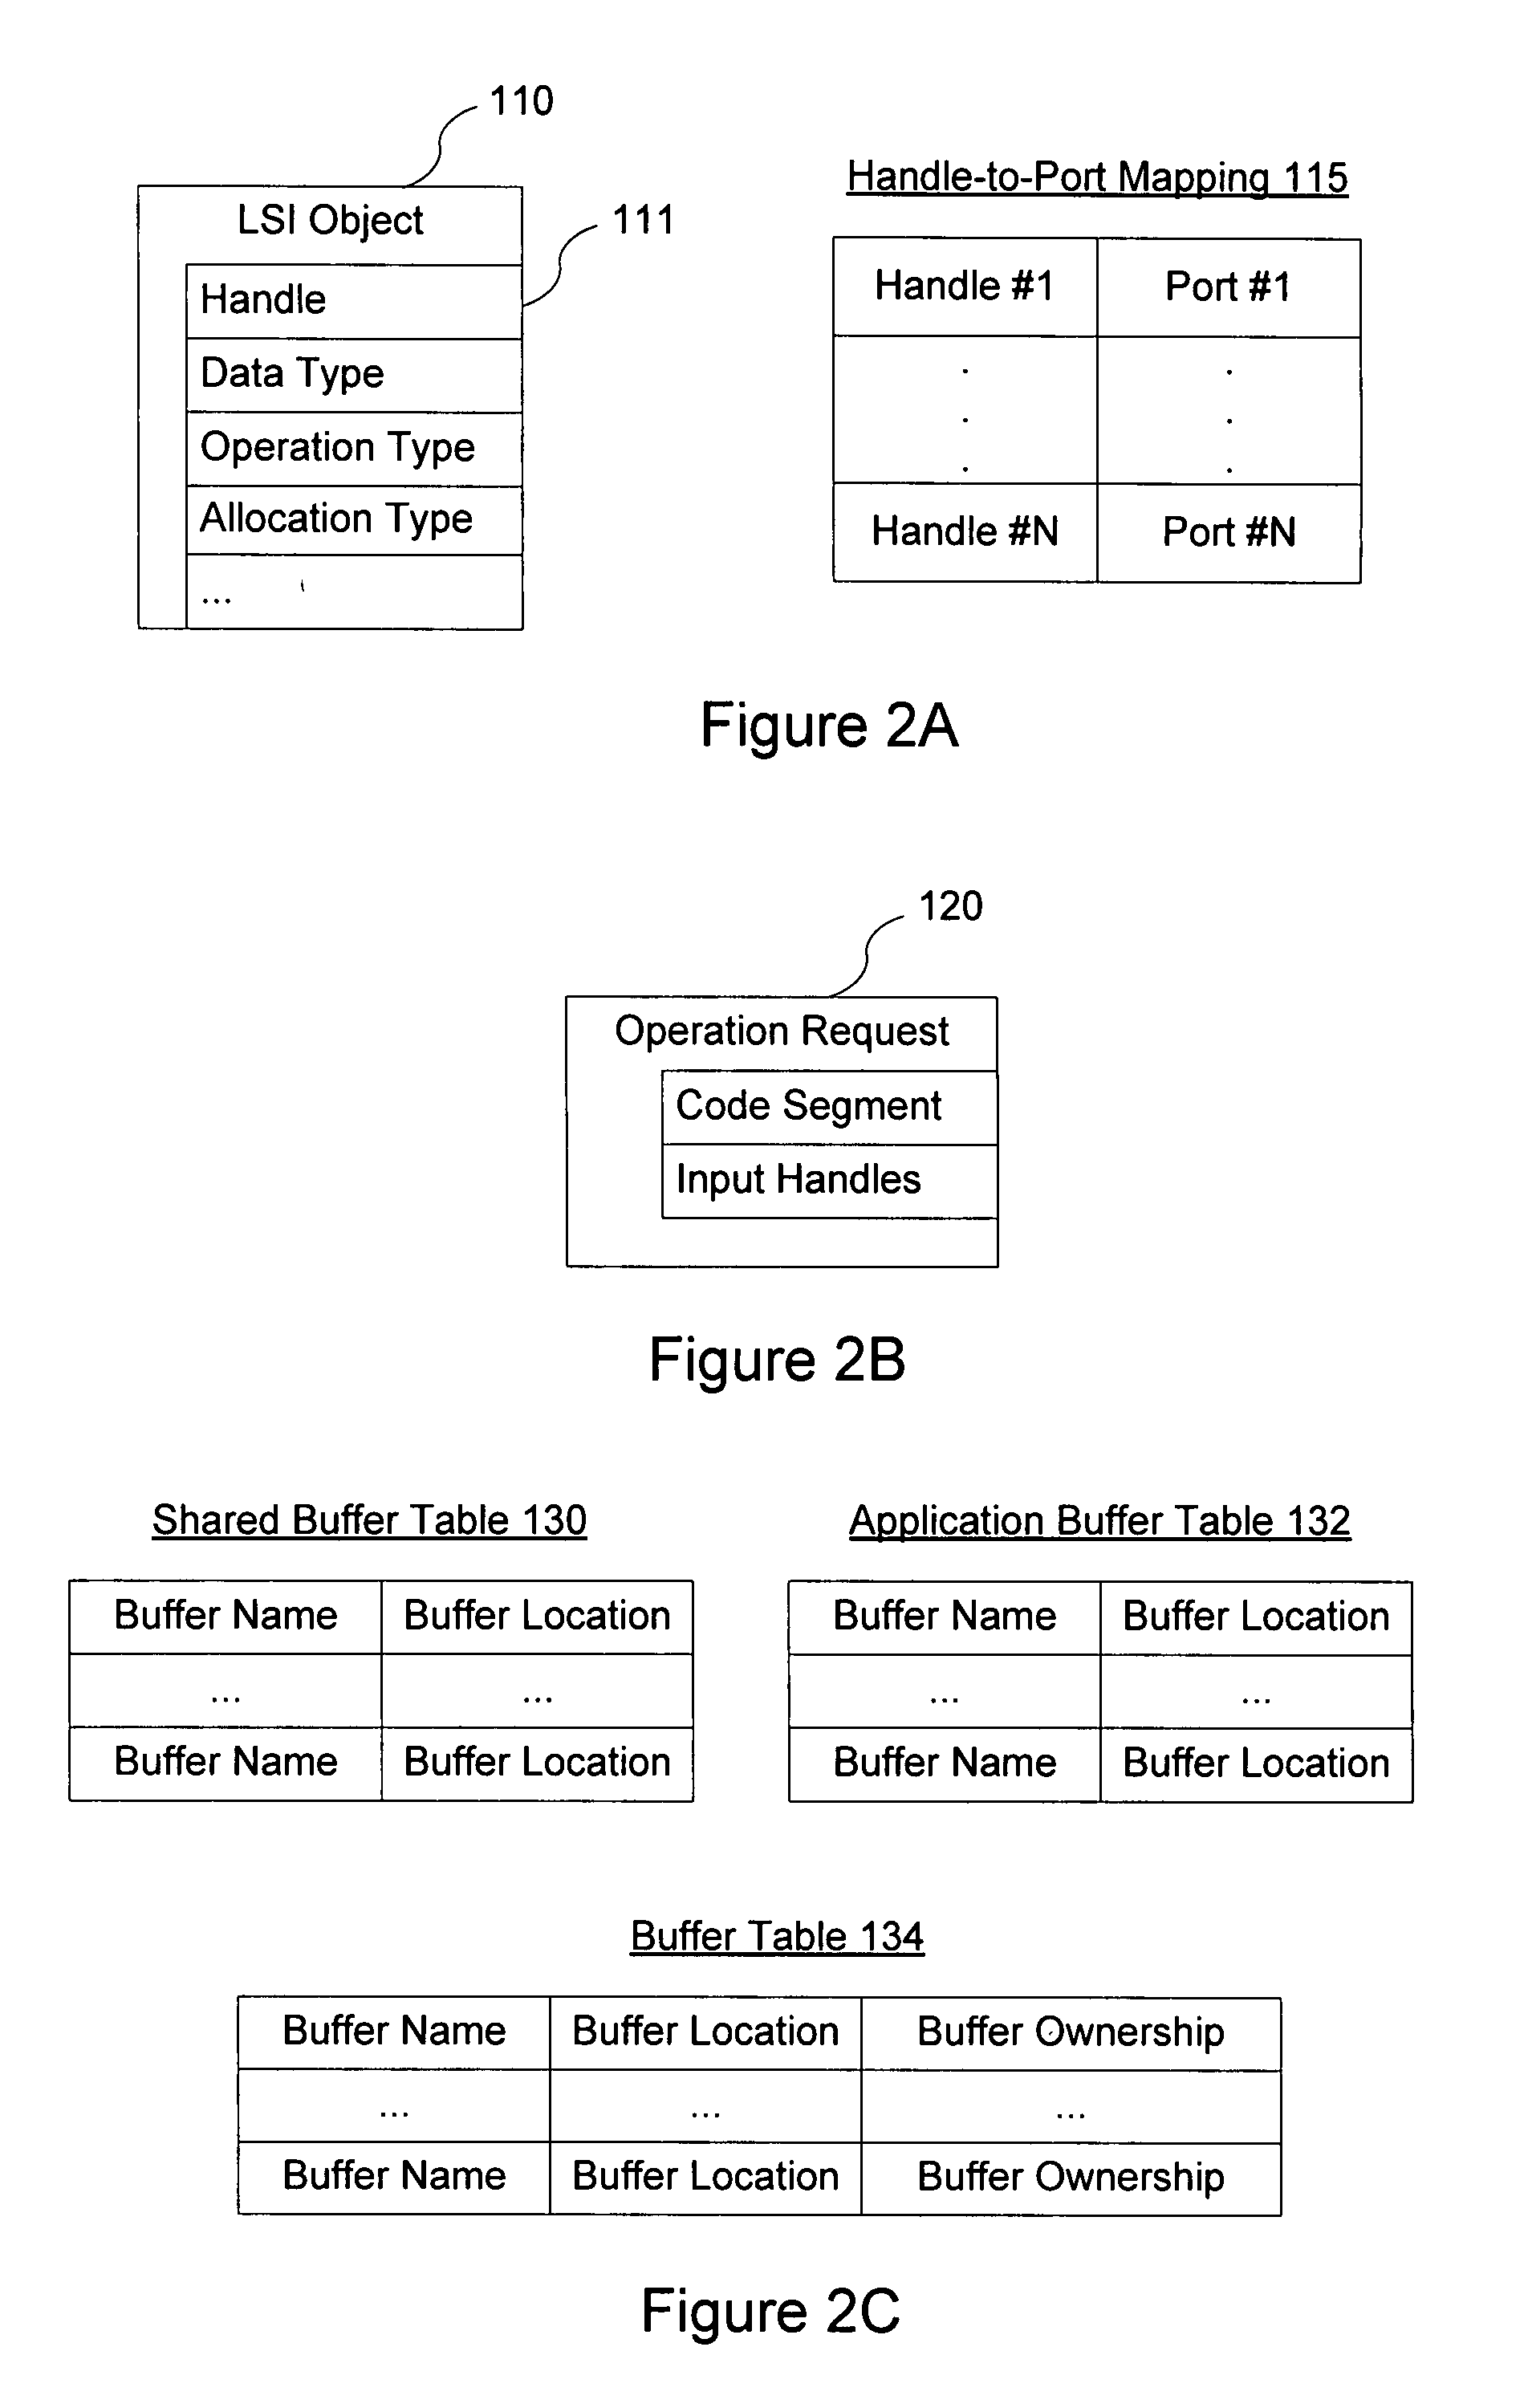 Systems and methods for debugging an application running on a parallel-processing computer system